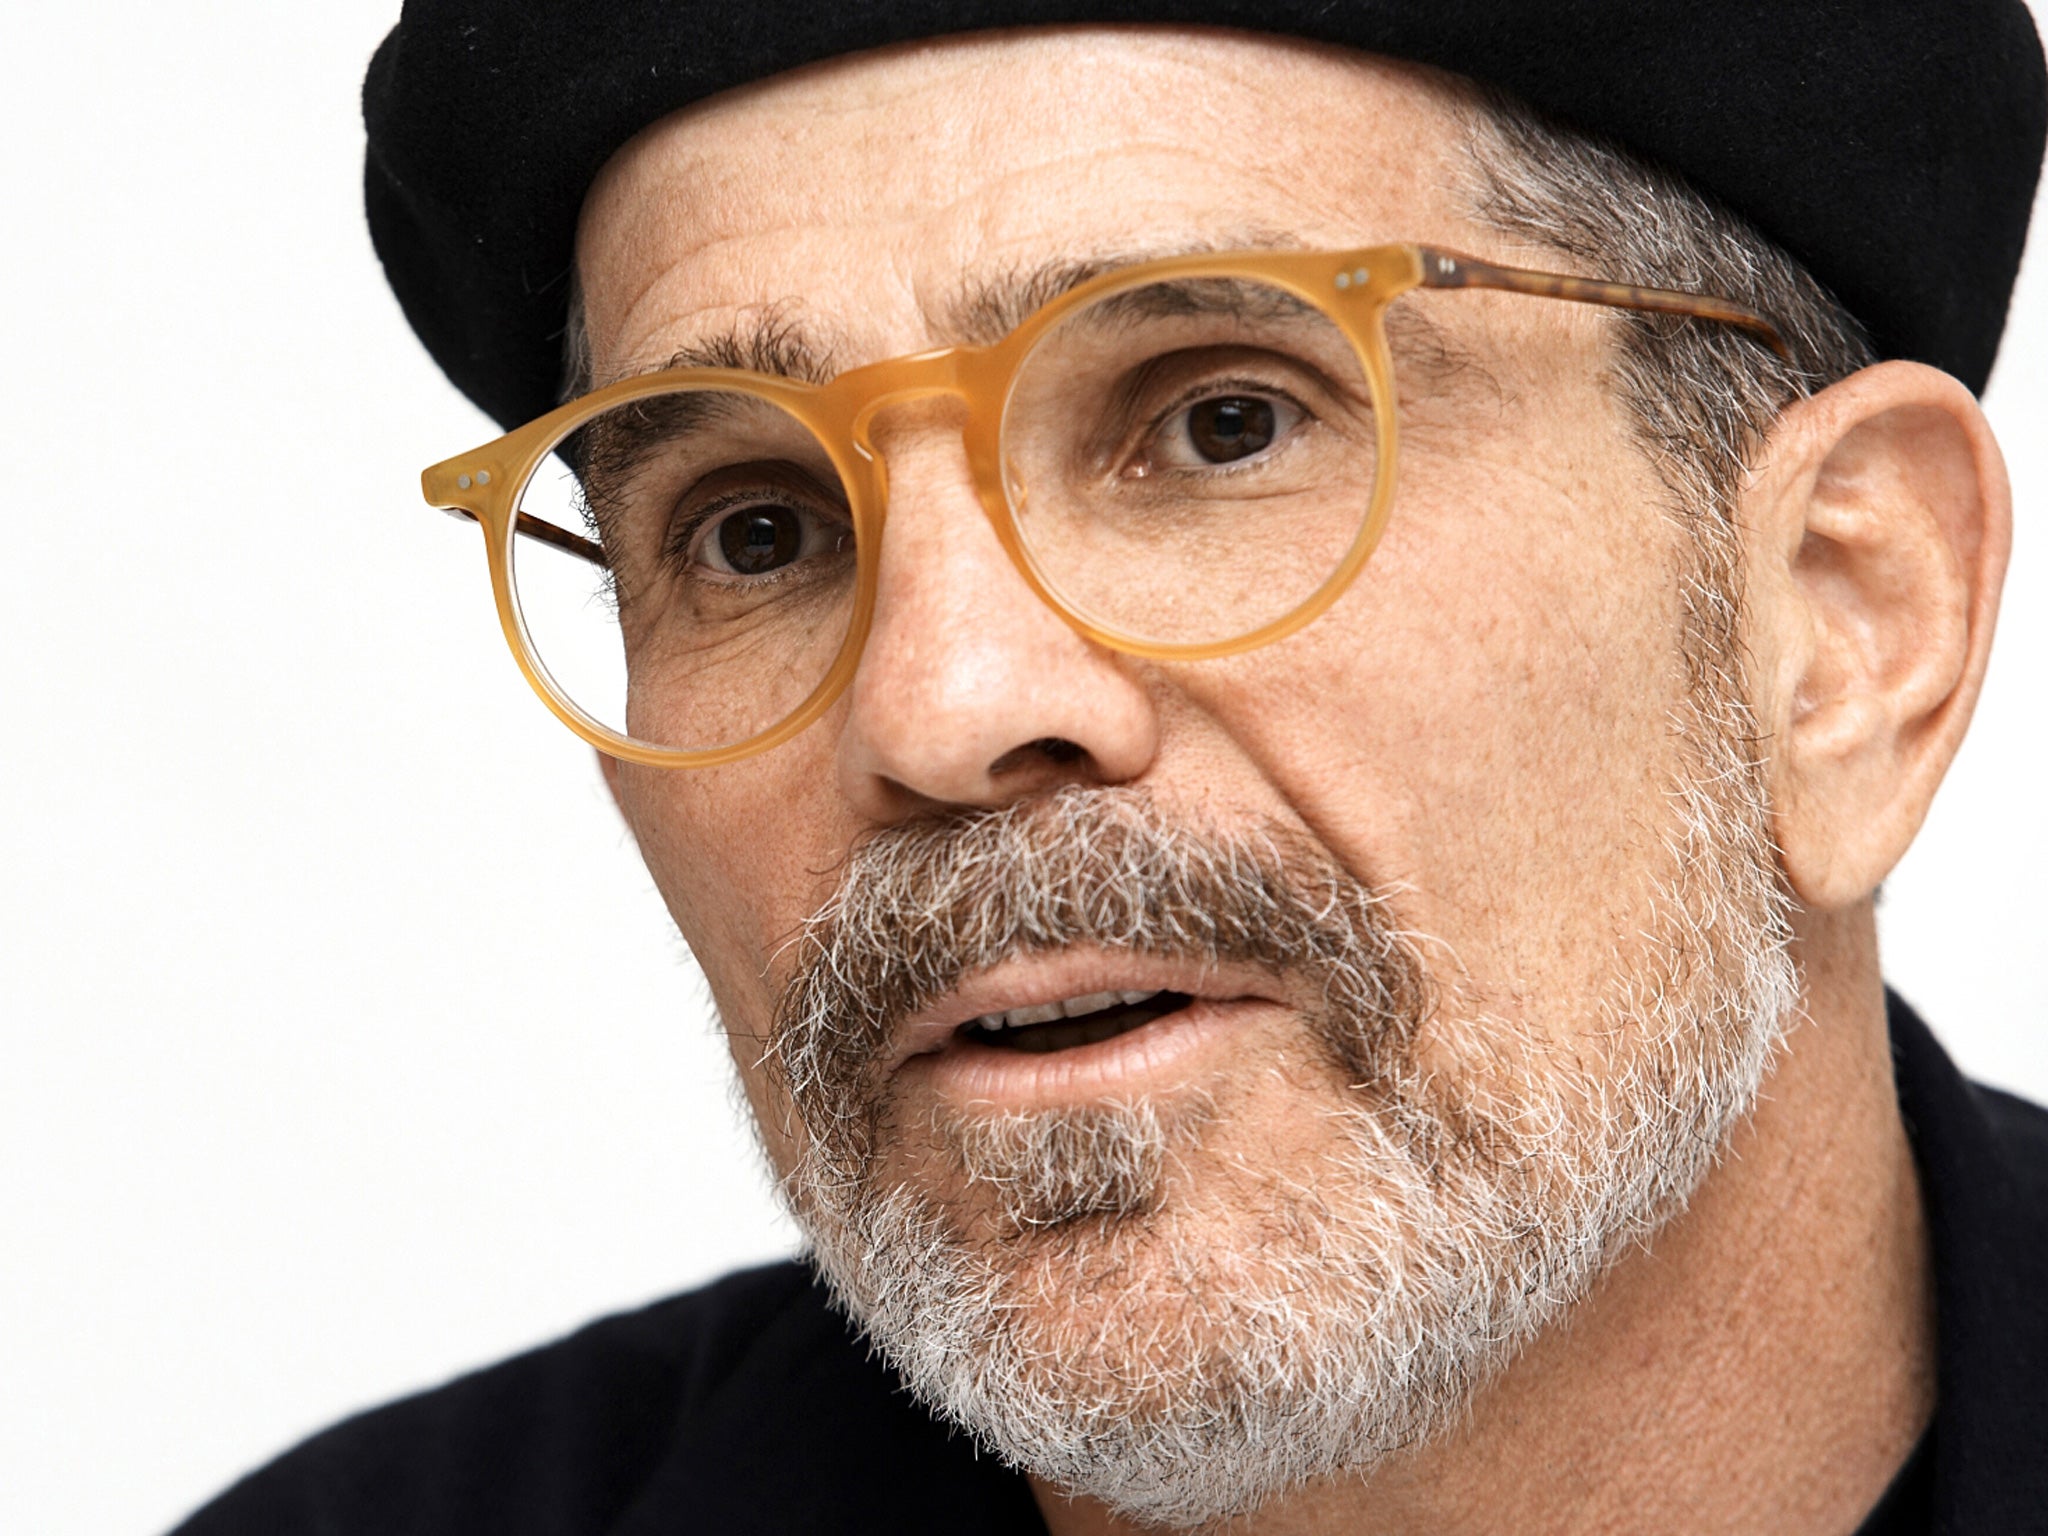 David Mamet on Race his provocative new play The Independent